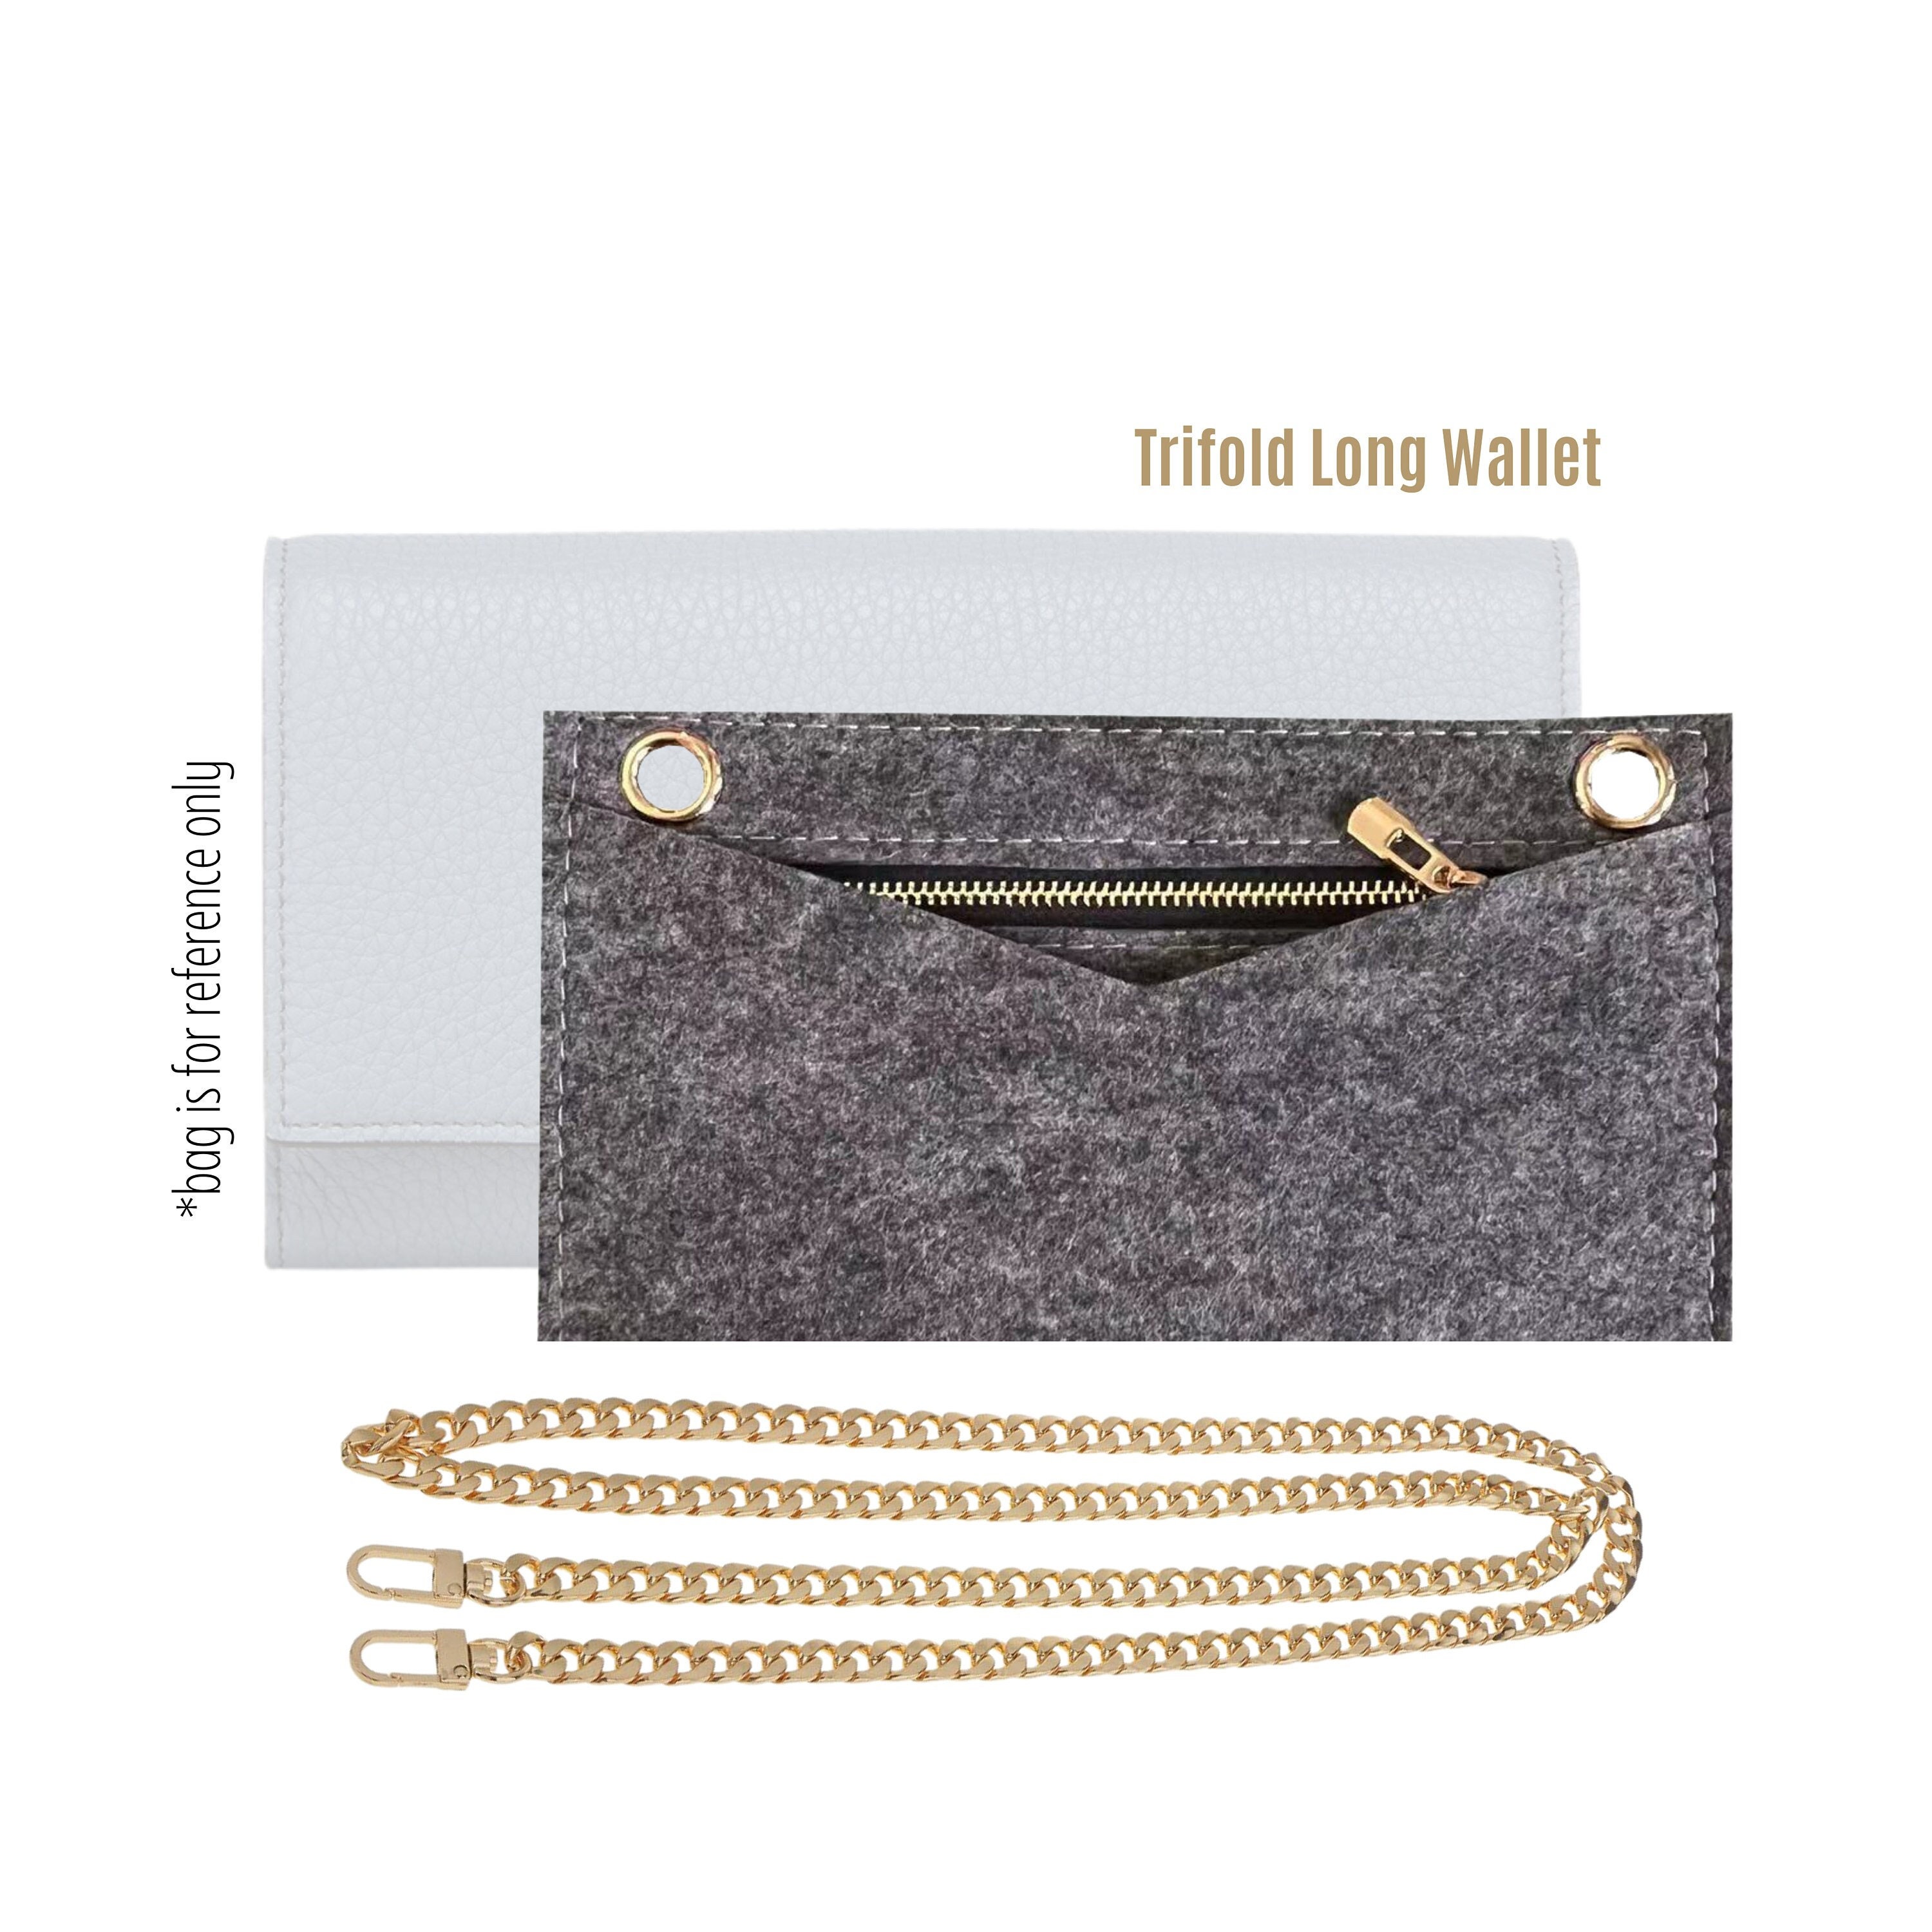  Long Wallet Conversion Kit for Long Flap Wallet Insert & Chain  Strap Wallet on Chain Gold Silver CardHolder Crossbody Converter Kit (120cm  Silver Leather Chain, Olive) : Handmade Products